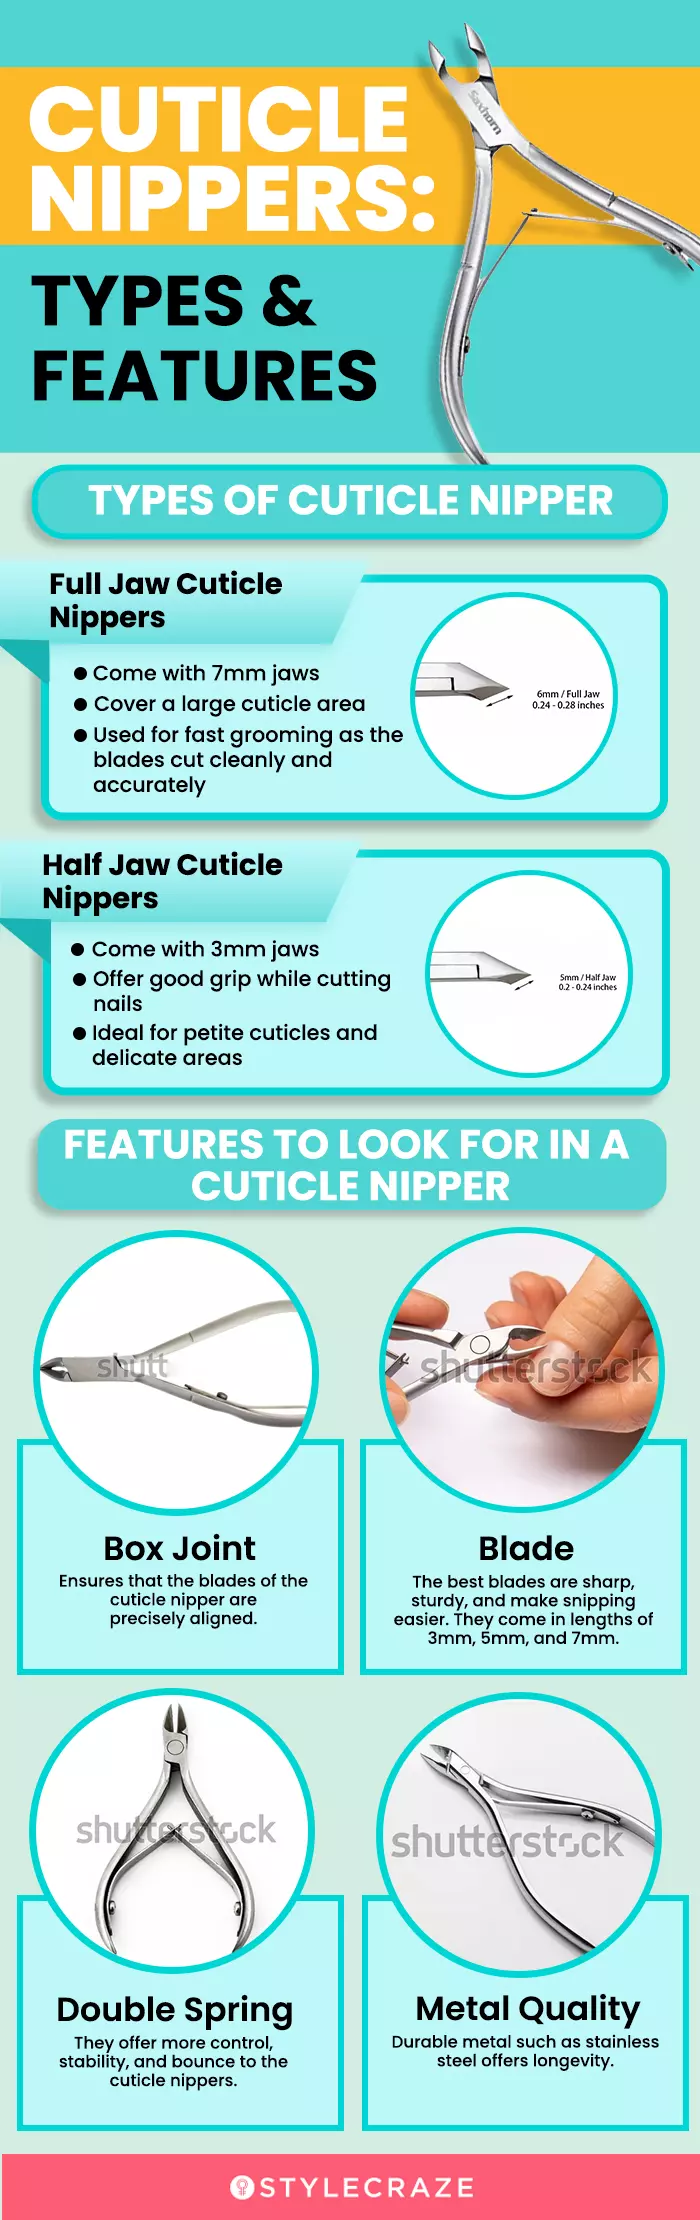 Cuticle Nippers: Types & Features (infographic)